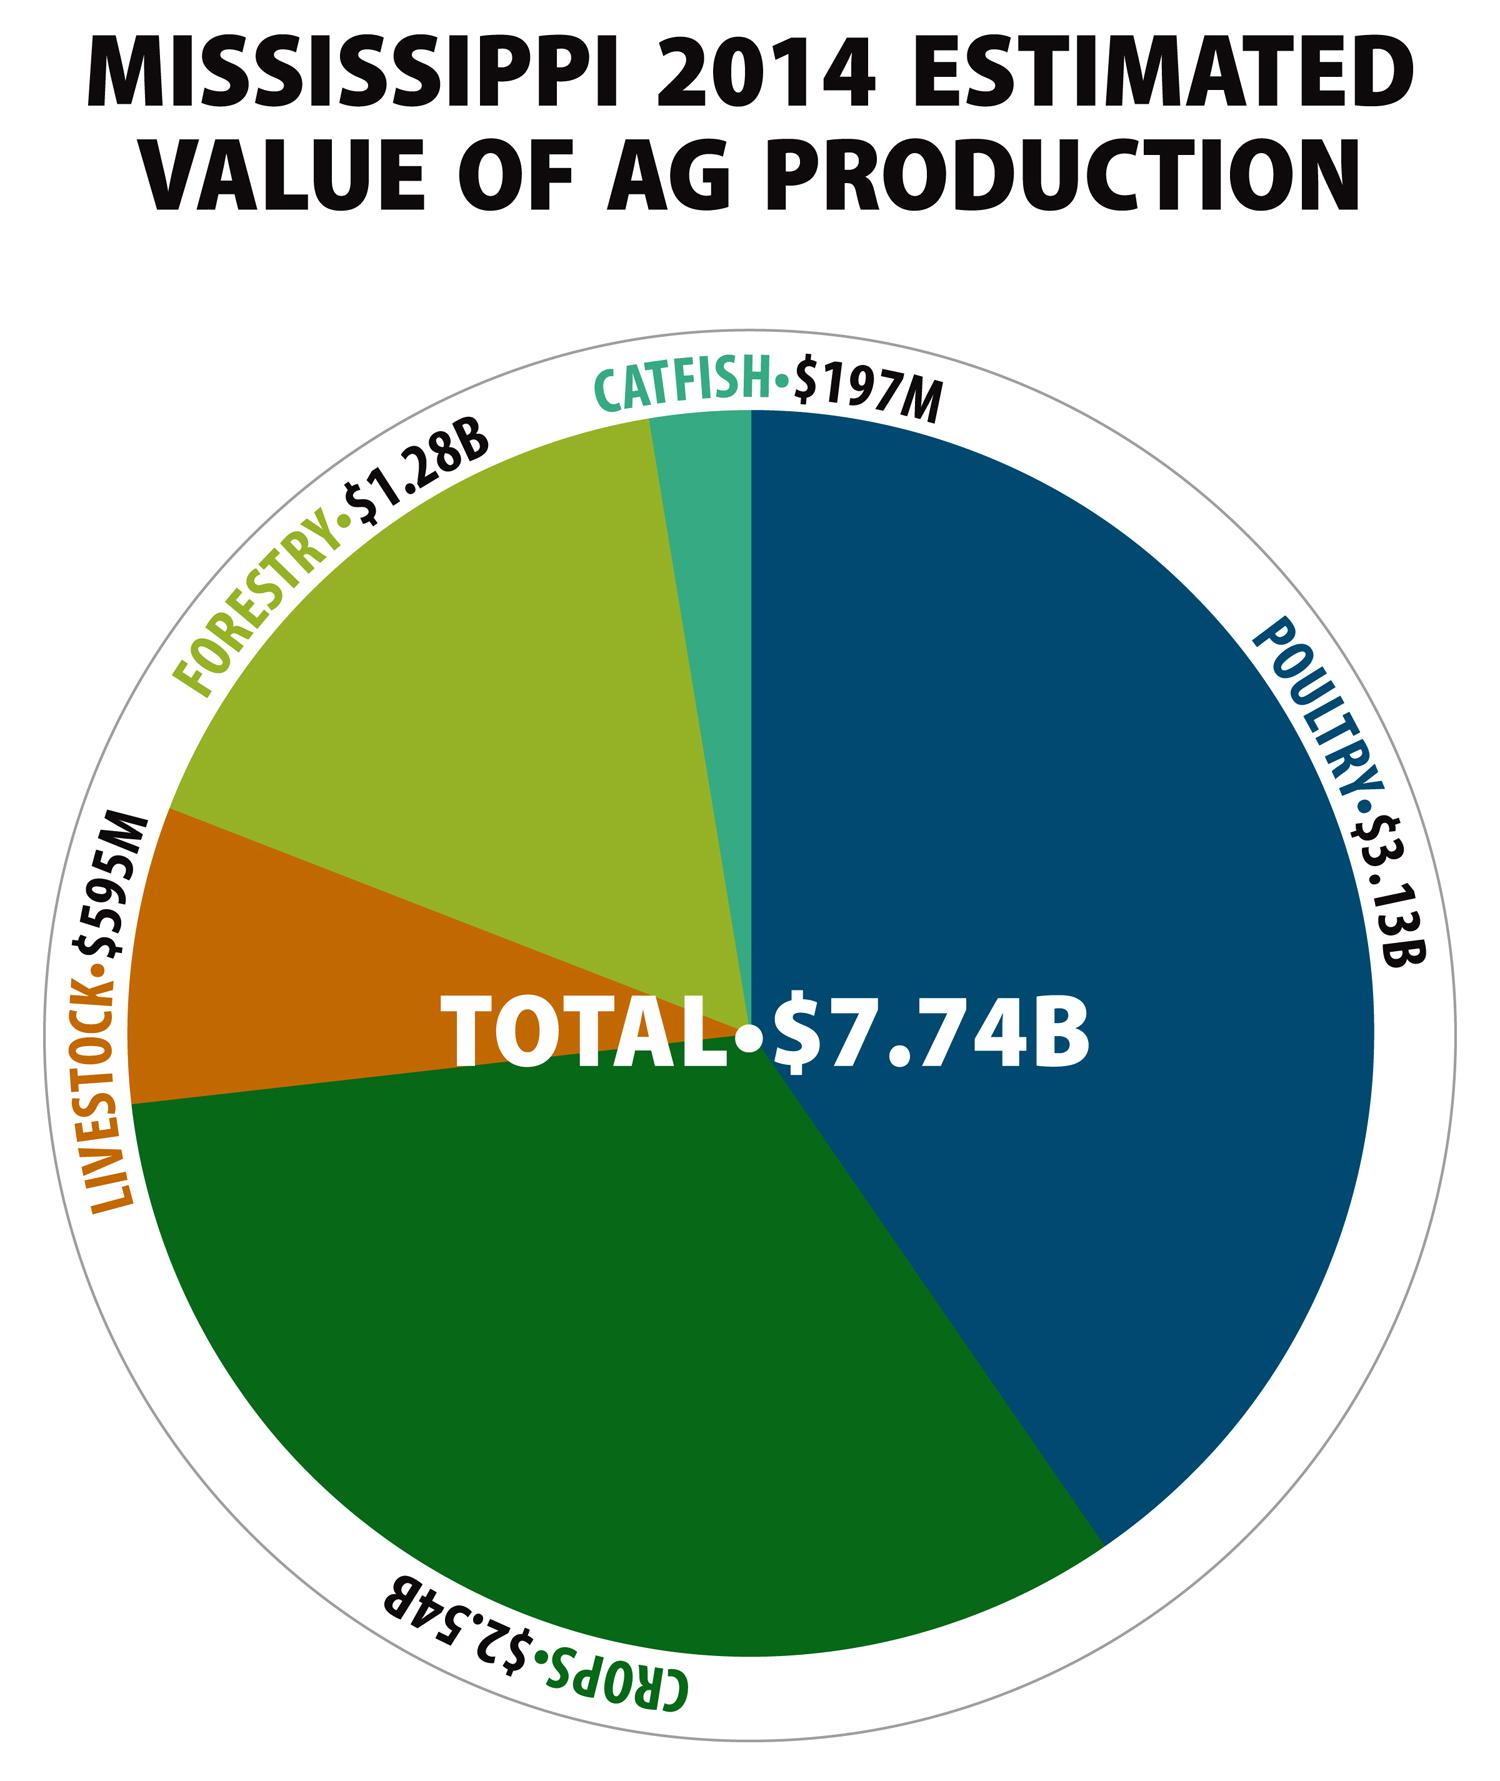 Mississippi 2014 Estimated Value of Ag Production